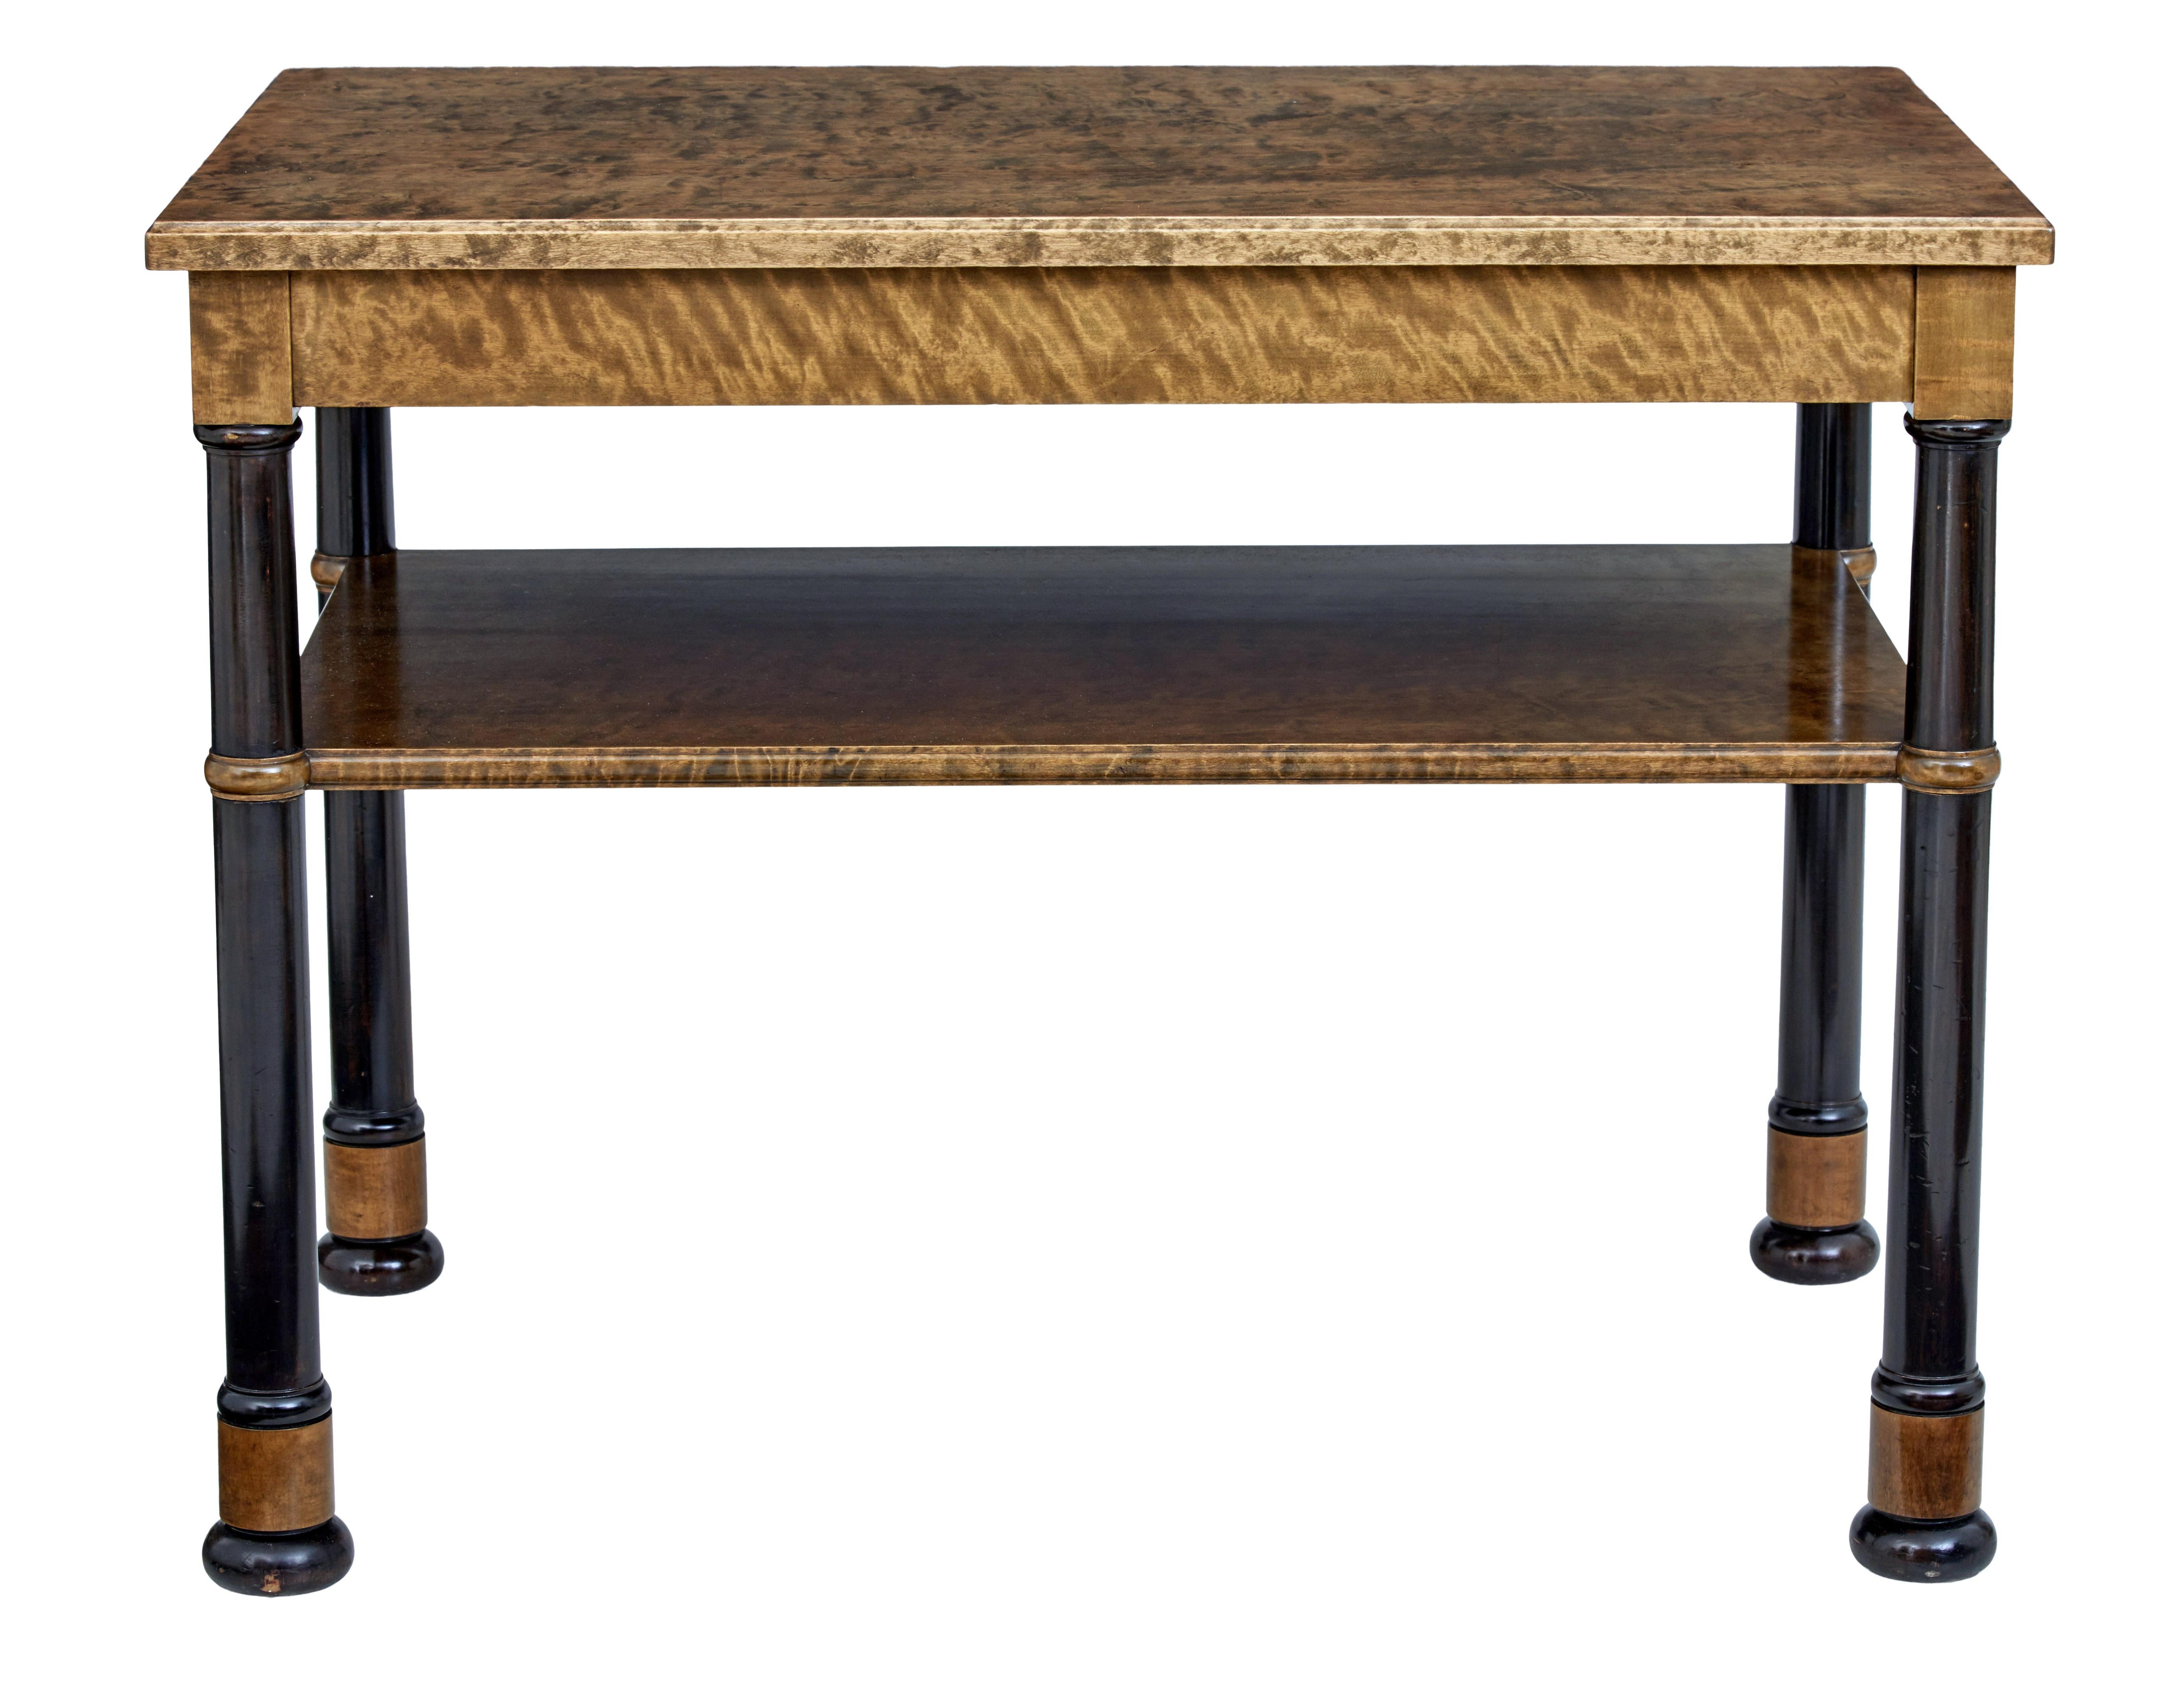 Early 20th century Art Deco birch serving table, circa 1930.

Fine quality Swedish birch table. Rectangular top with edging, supported by 4 stained column legs which provides the support for the shelf below the top.

Ideal for use in retail with